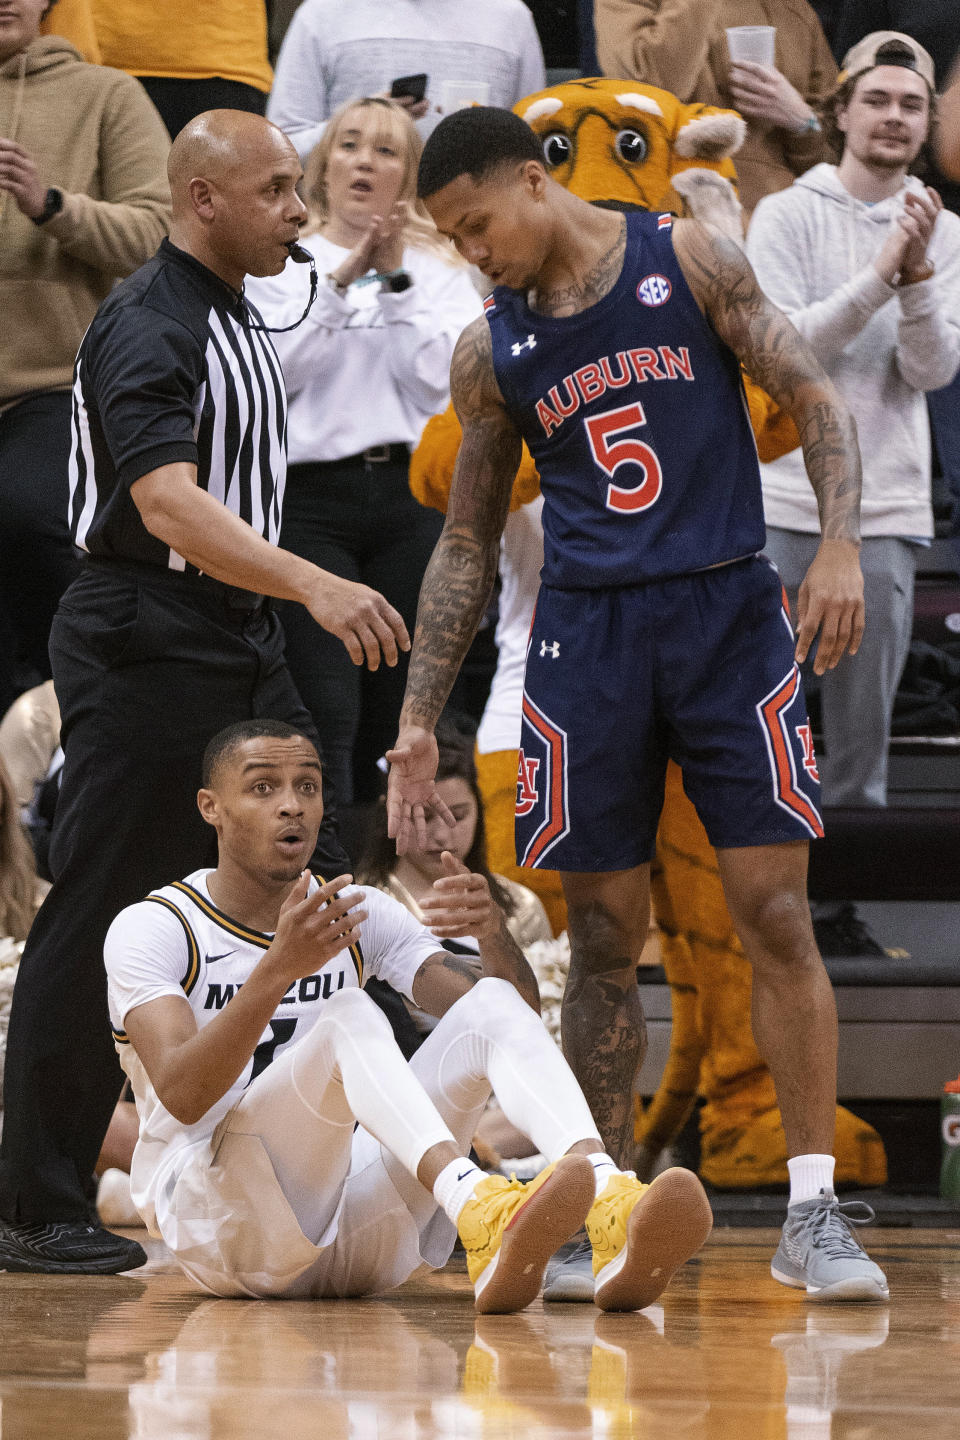 Missouri's Xavier Pinson, left, reacts after getting called for a foul on Auburn's J'Von McCormick, right, during the first half of an NCAA college basketball game Saturday, Feb. 15, 2020, in Columbia, Mo. (AP Photo/L.G. Patterson)